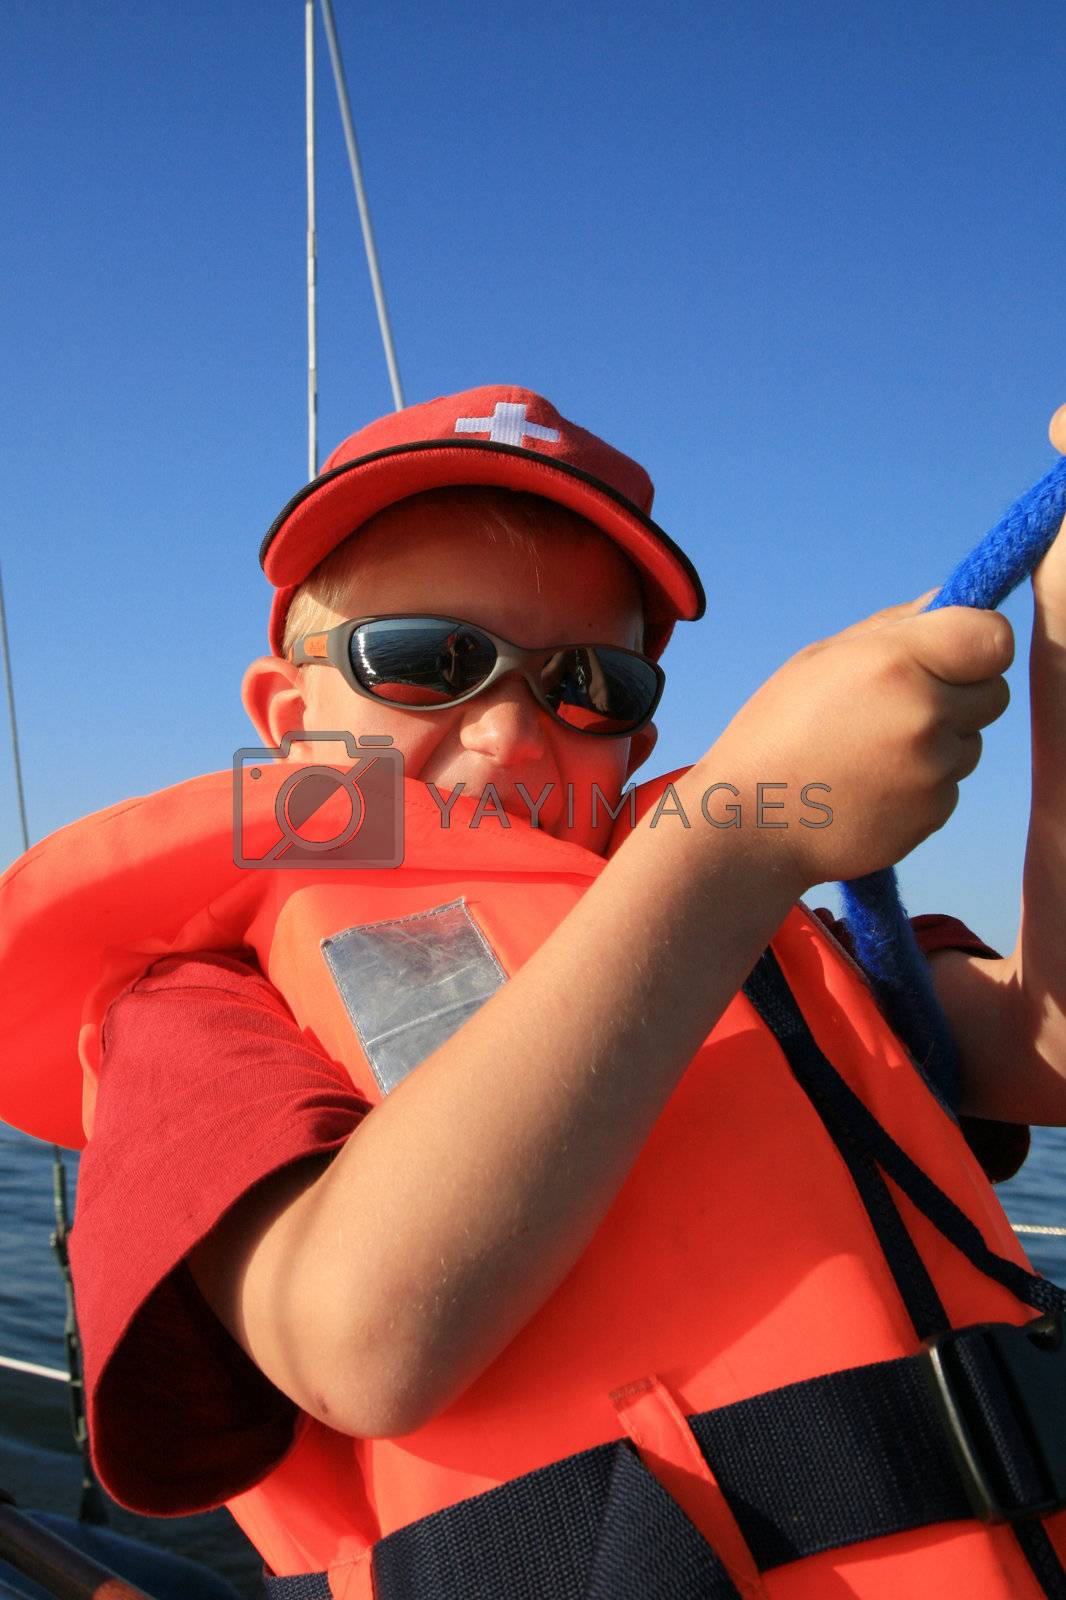 Royalty free image of Young yachtsman by fotokate